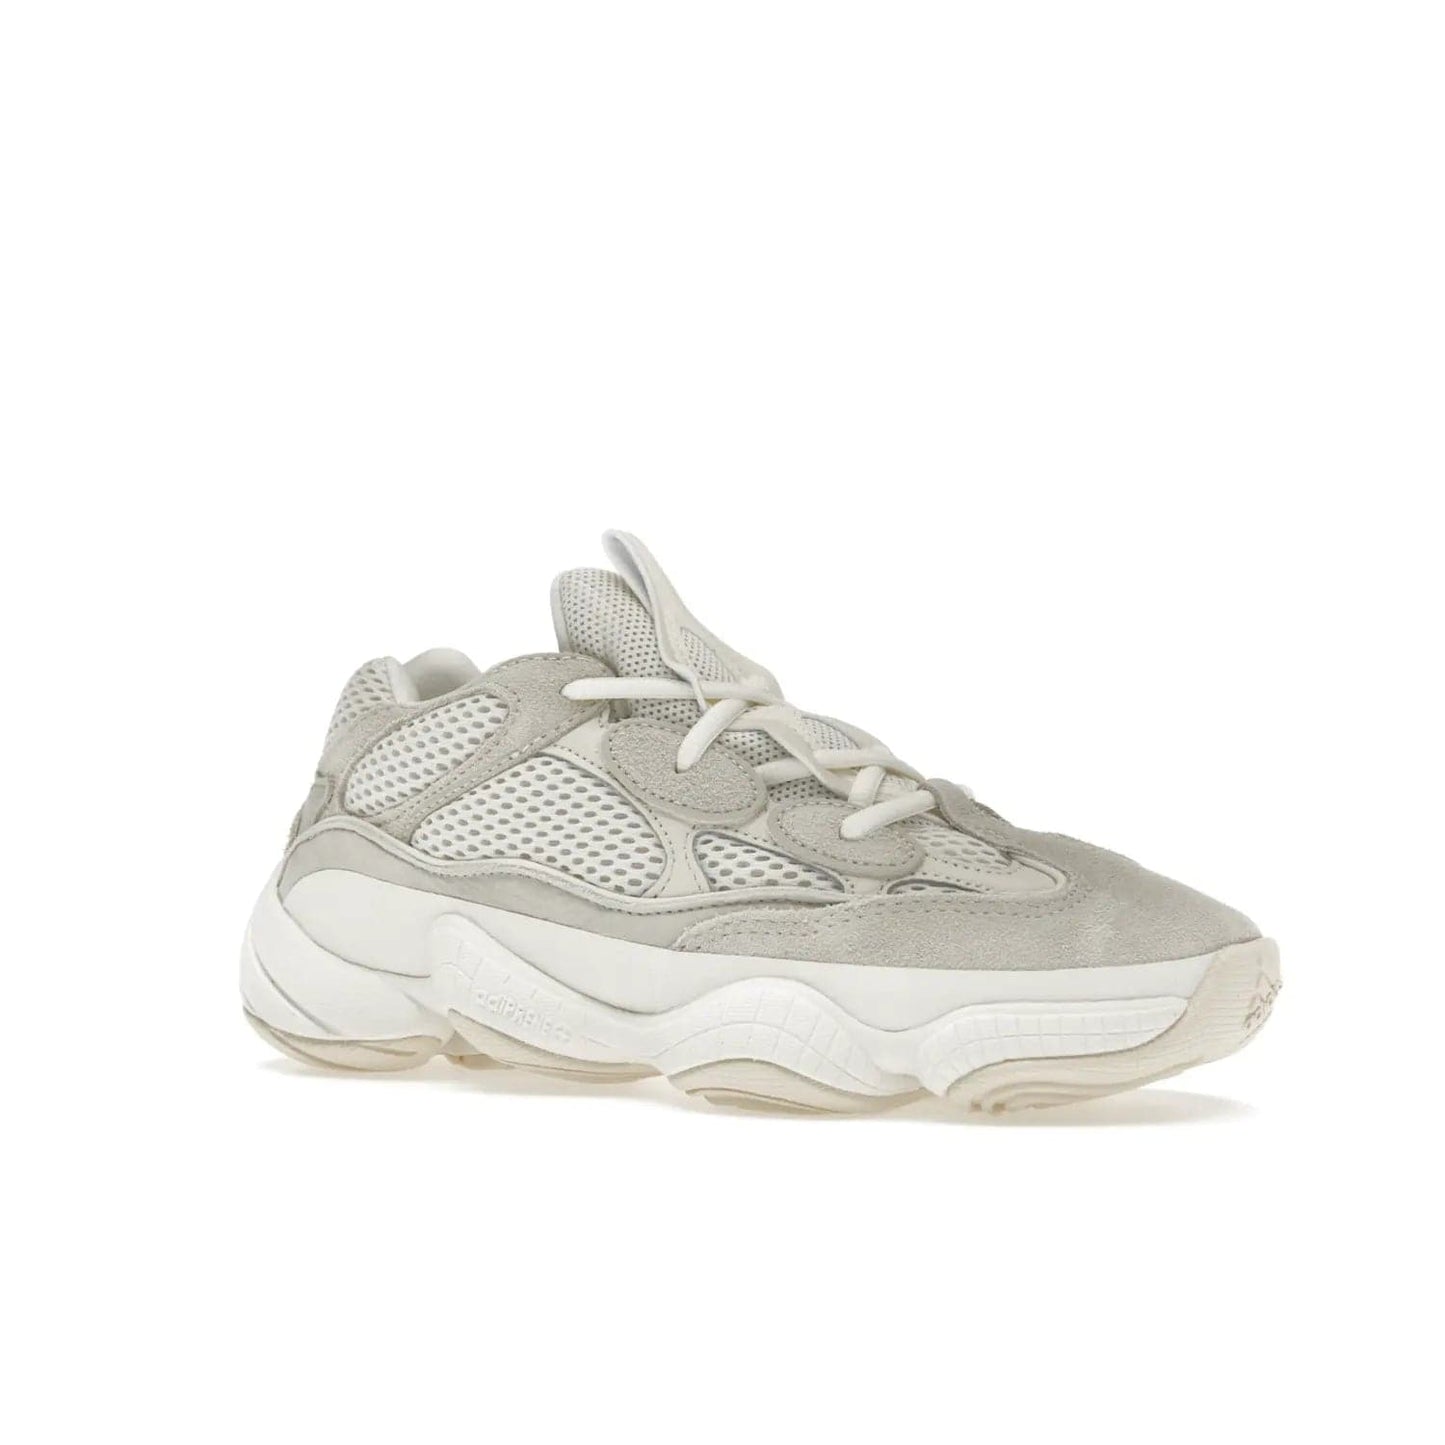 adidas Yeezy 500 Bone White (2023) - Image 4 - Only at www.BallersClubKickz.com - Experience the unique style of the adidas Yeezy 500 Bone White. Featuring a Bone White colorway and white accents, durable construction and comfortably light feel. Get ready to make a statement in 2023.